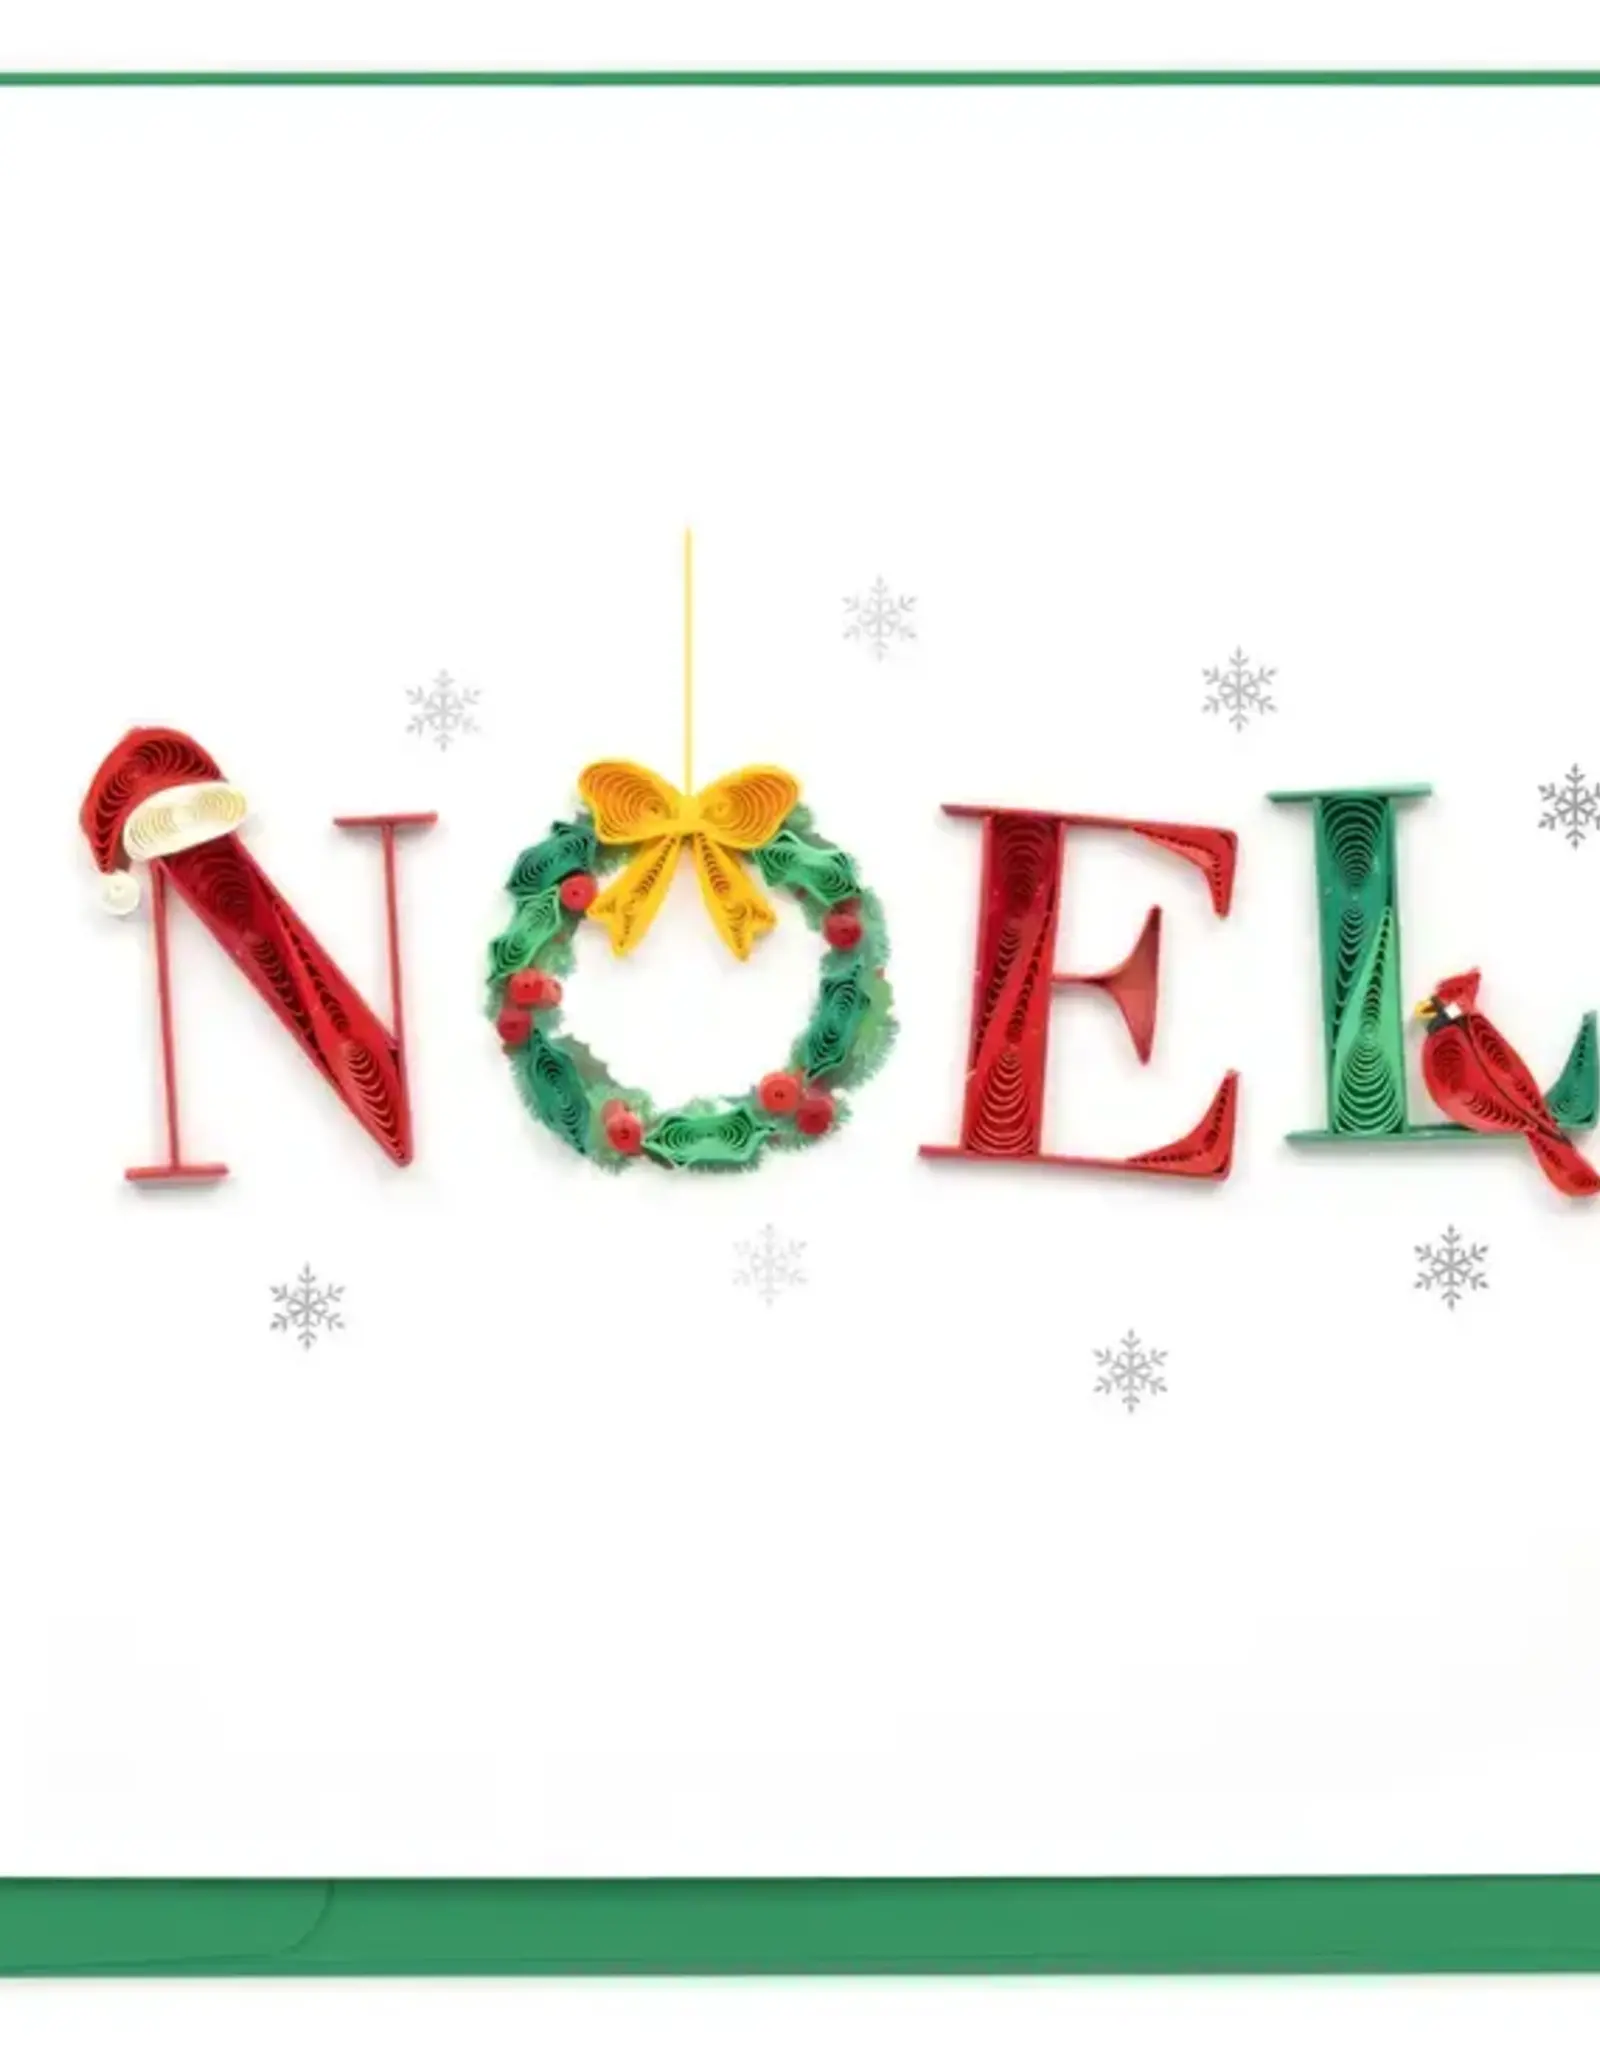 Quilling Card Quilled NOEL Christmas Card